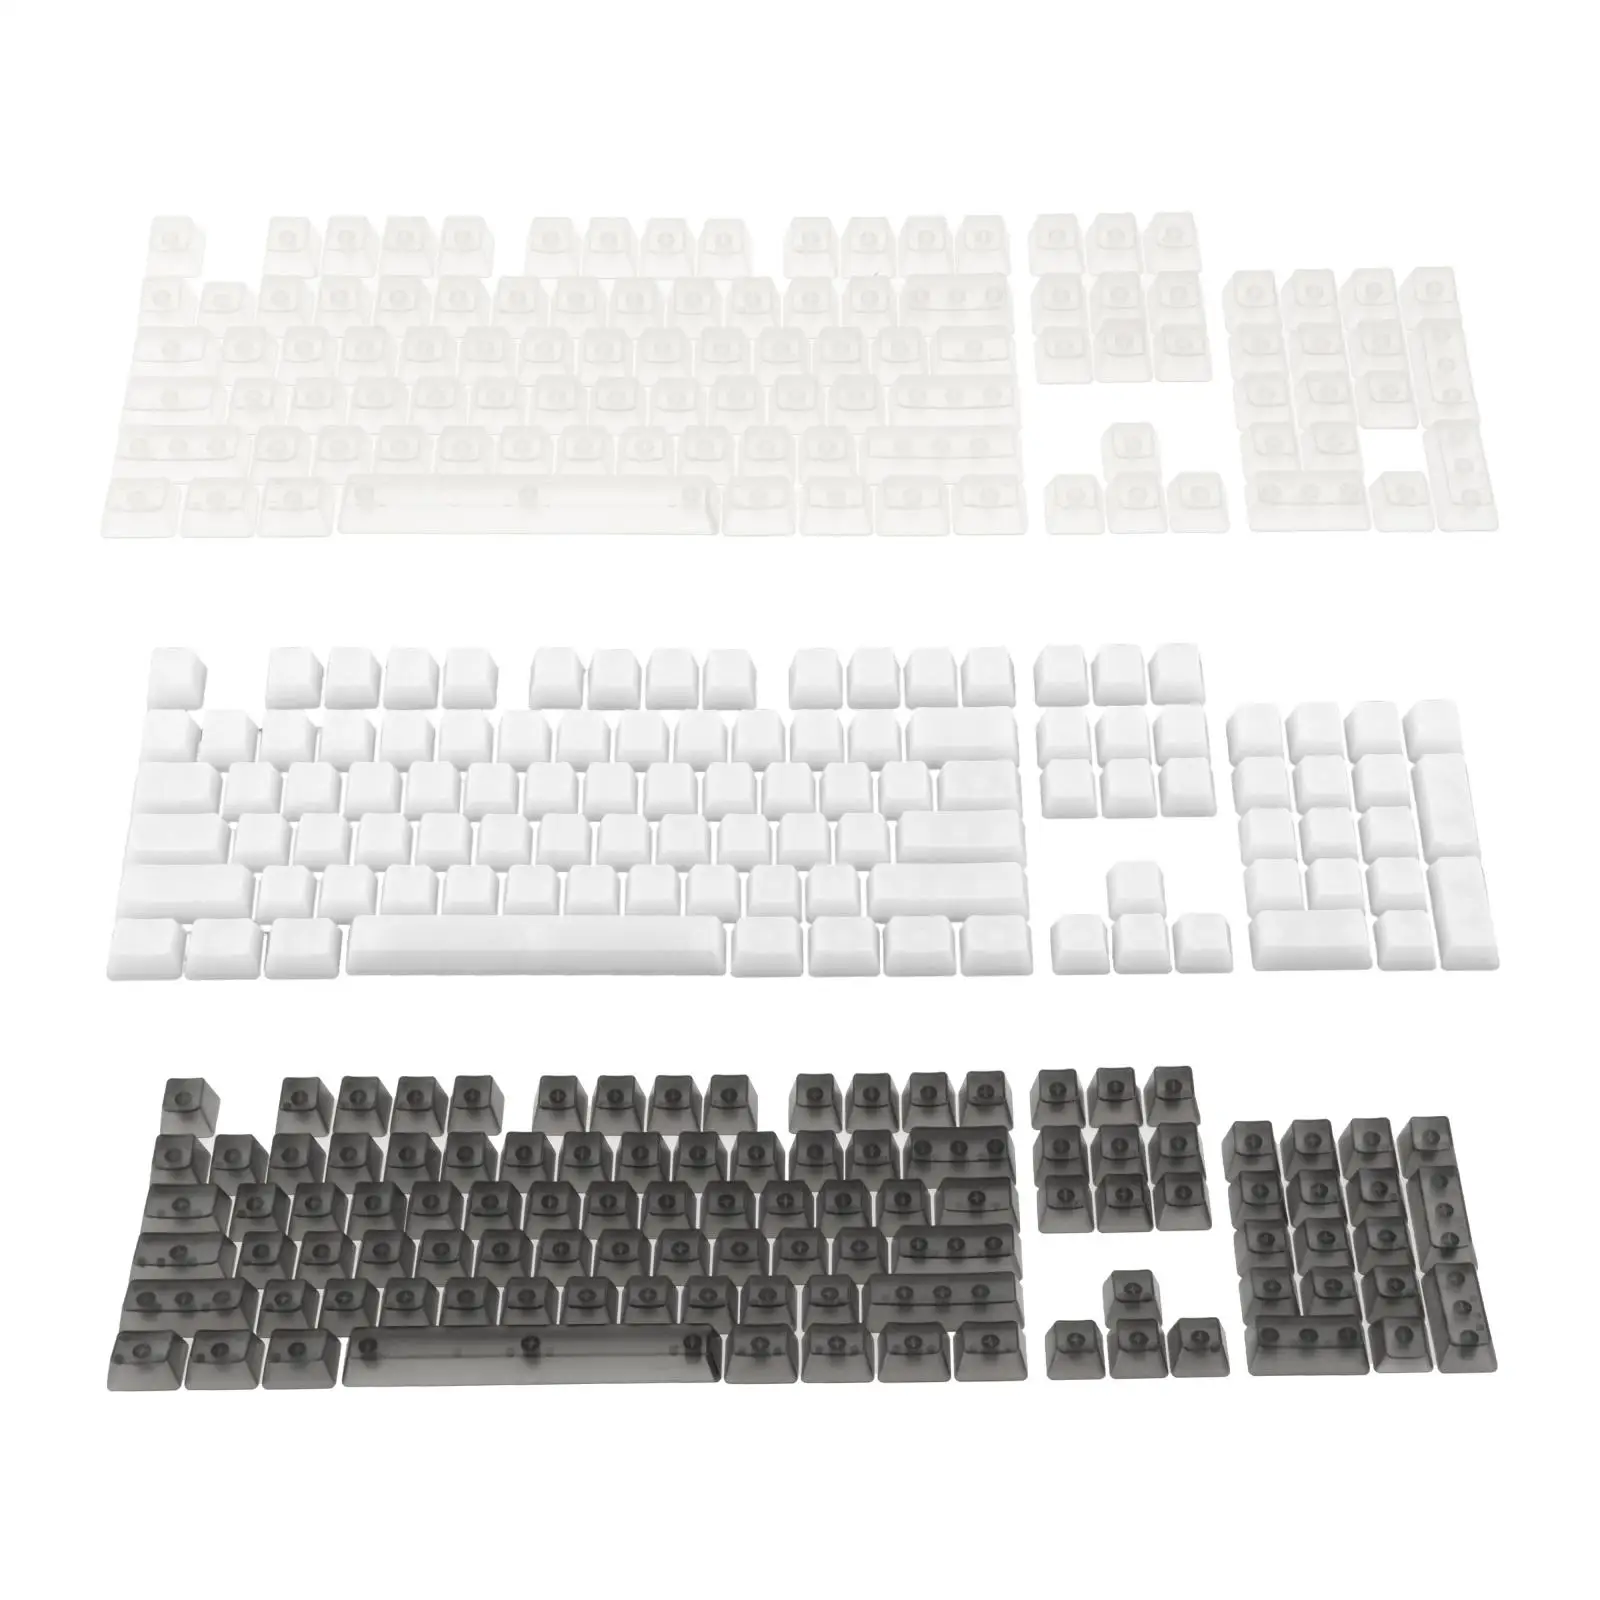 DIY Fully Transparent Keycaps Machinery High Toughness Cherry Profile Mechanical Keyboards Keyset for CHERRY MX/Clone Switches